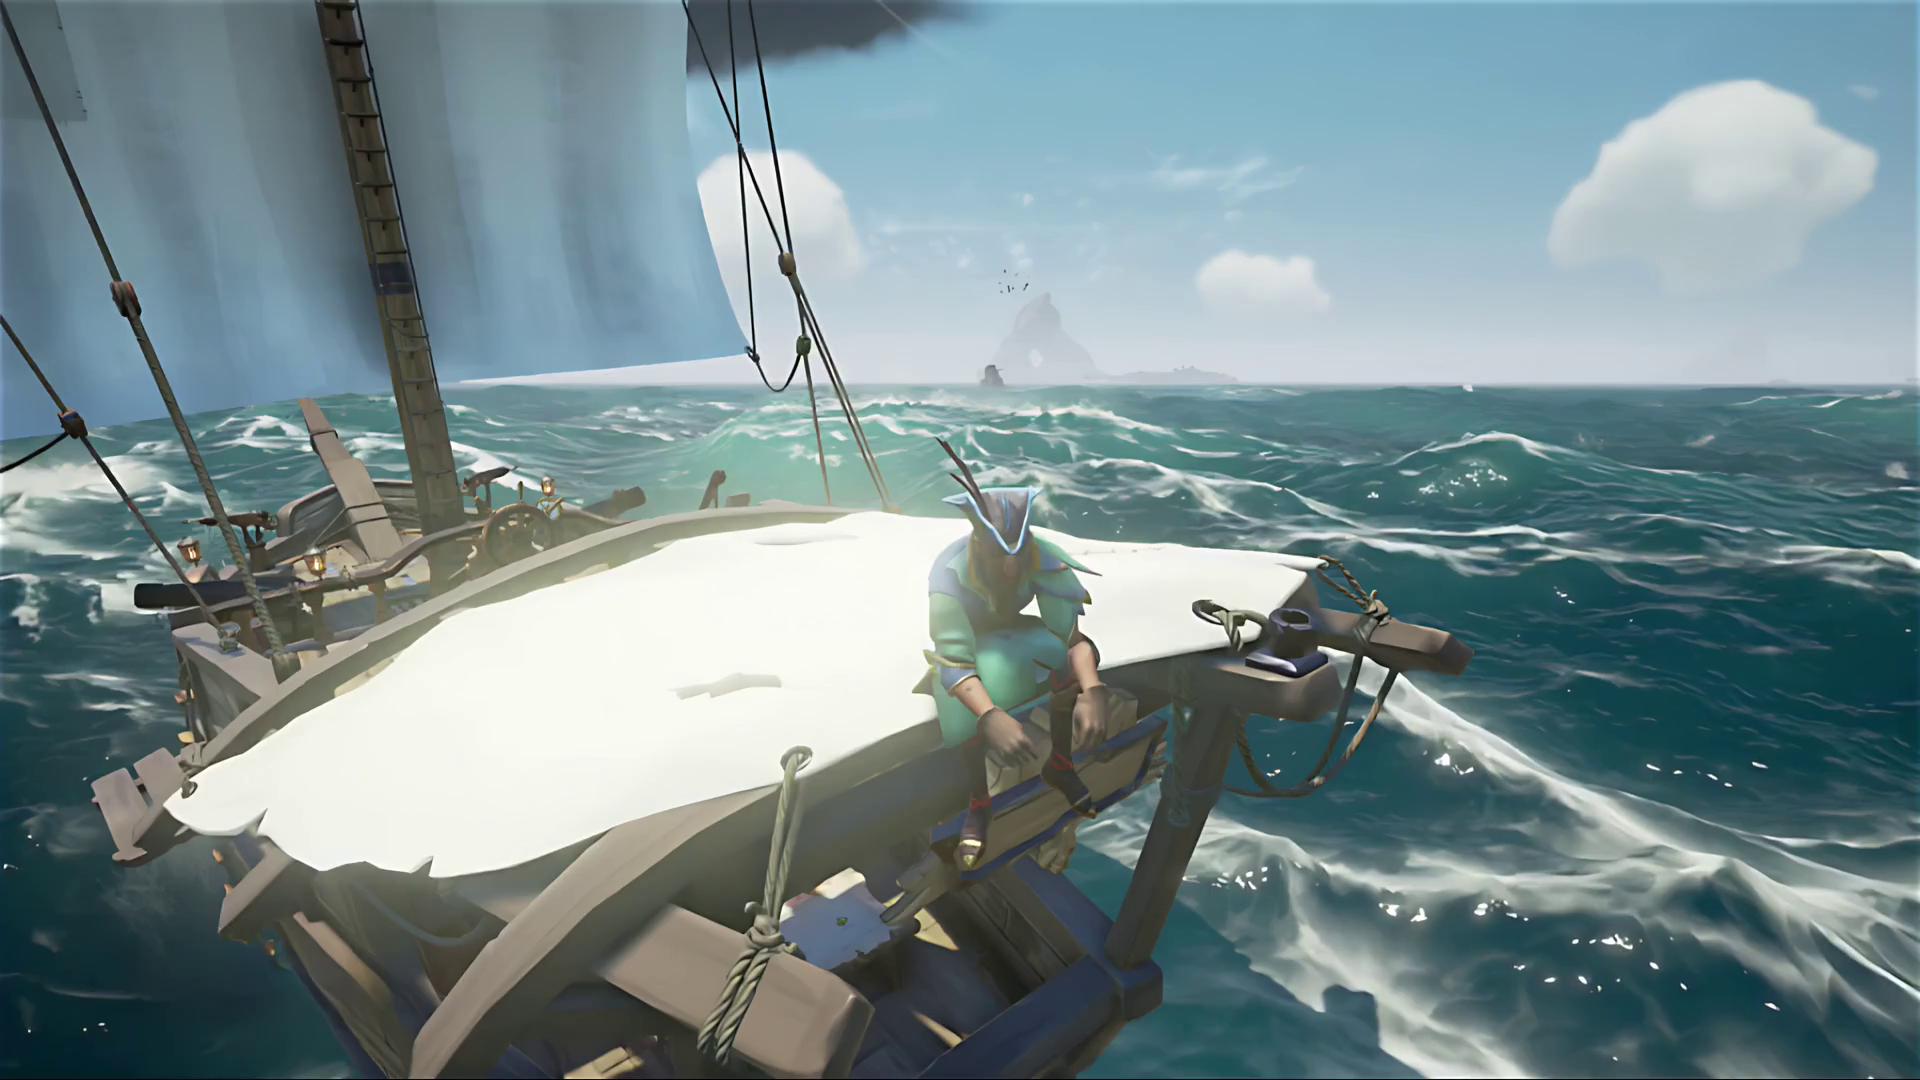 1348867 Sea Of Thieves HD  Rare Gallery HD Wallpapers